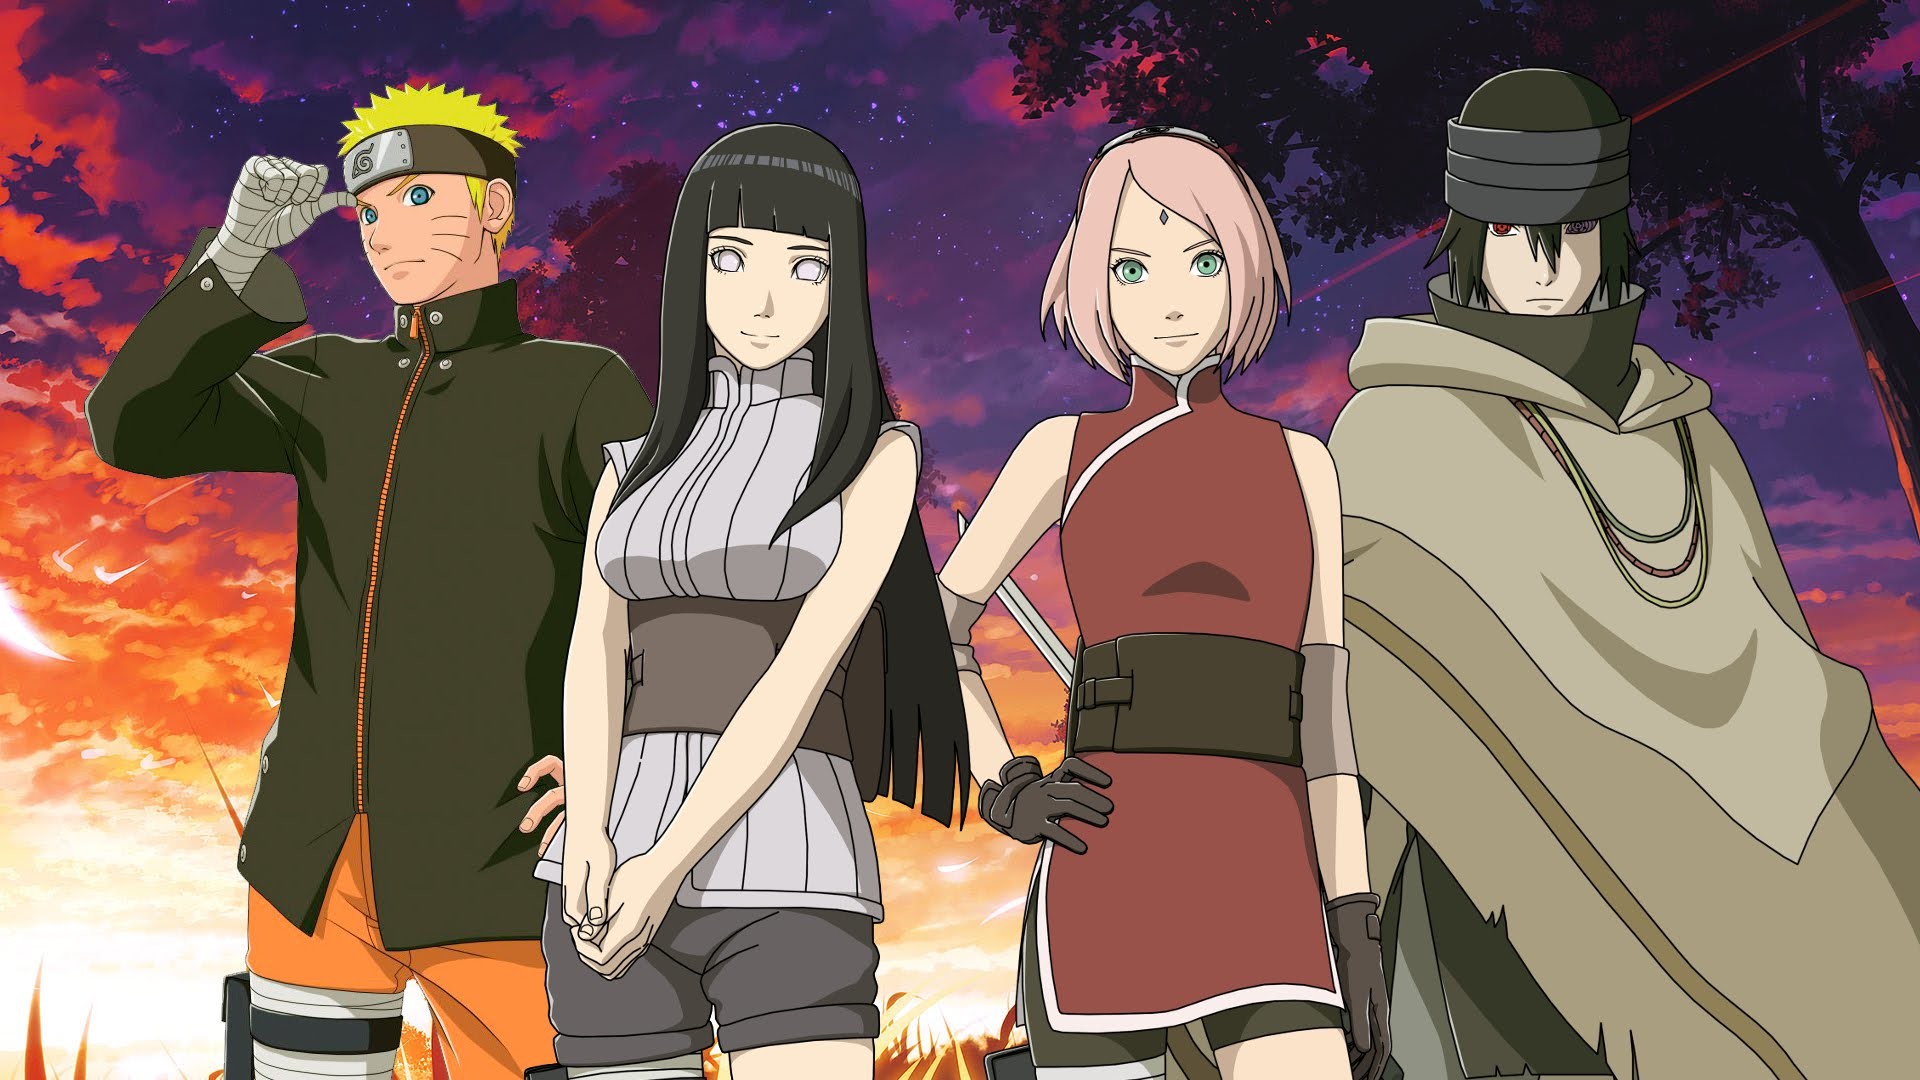 1920x1080 The Last One in The Waiting Line... - The Last Naruto the Movie Discussion